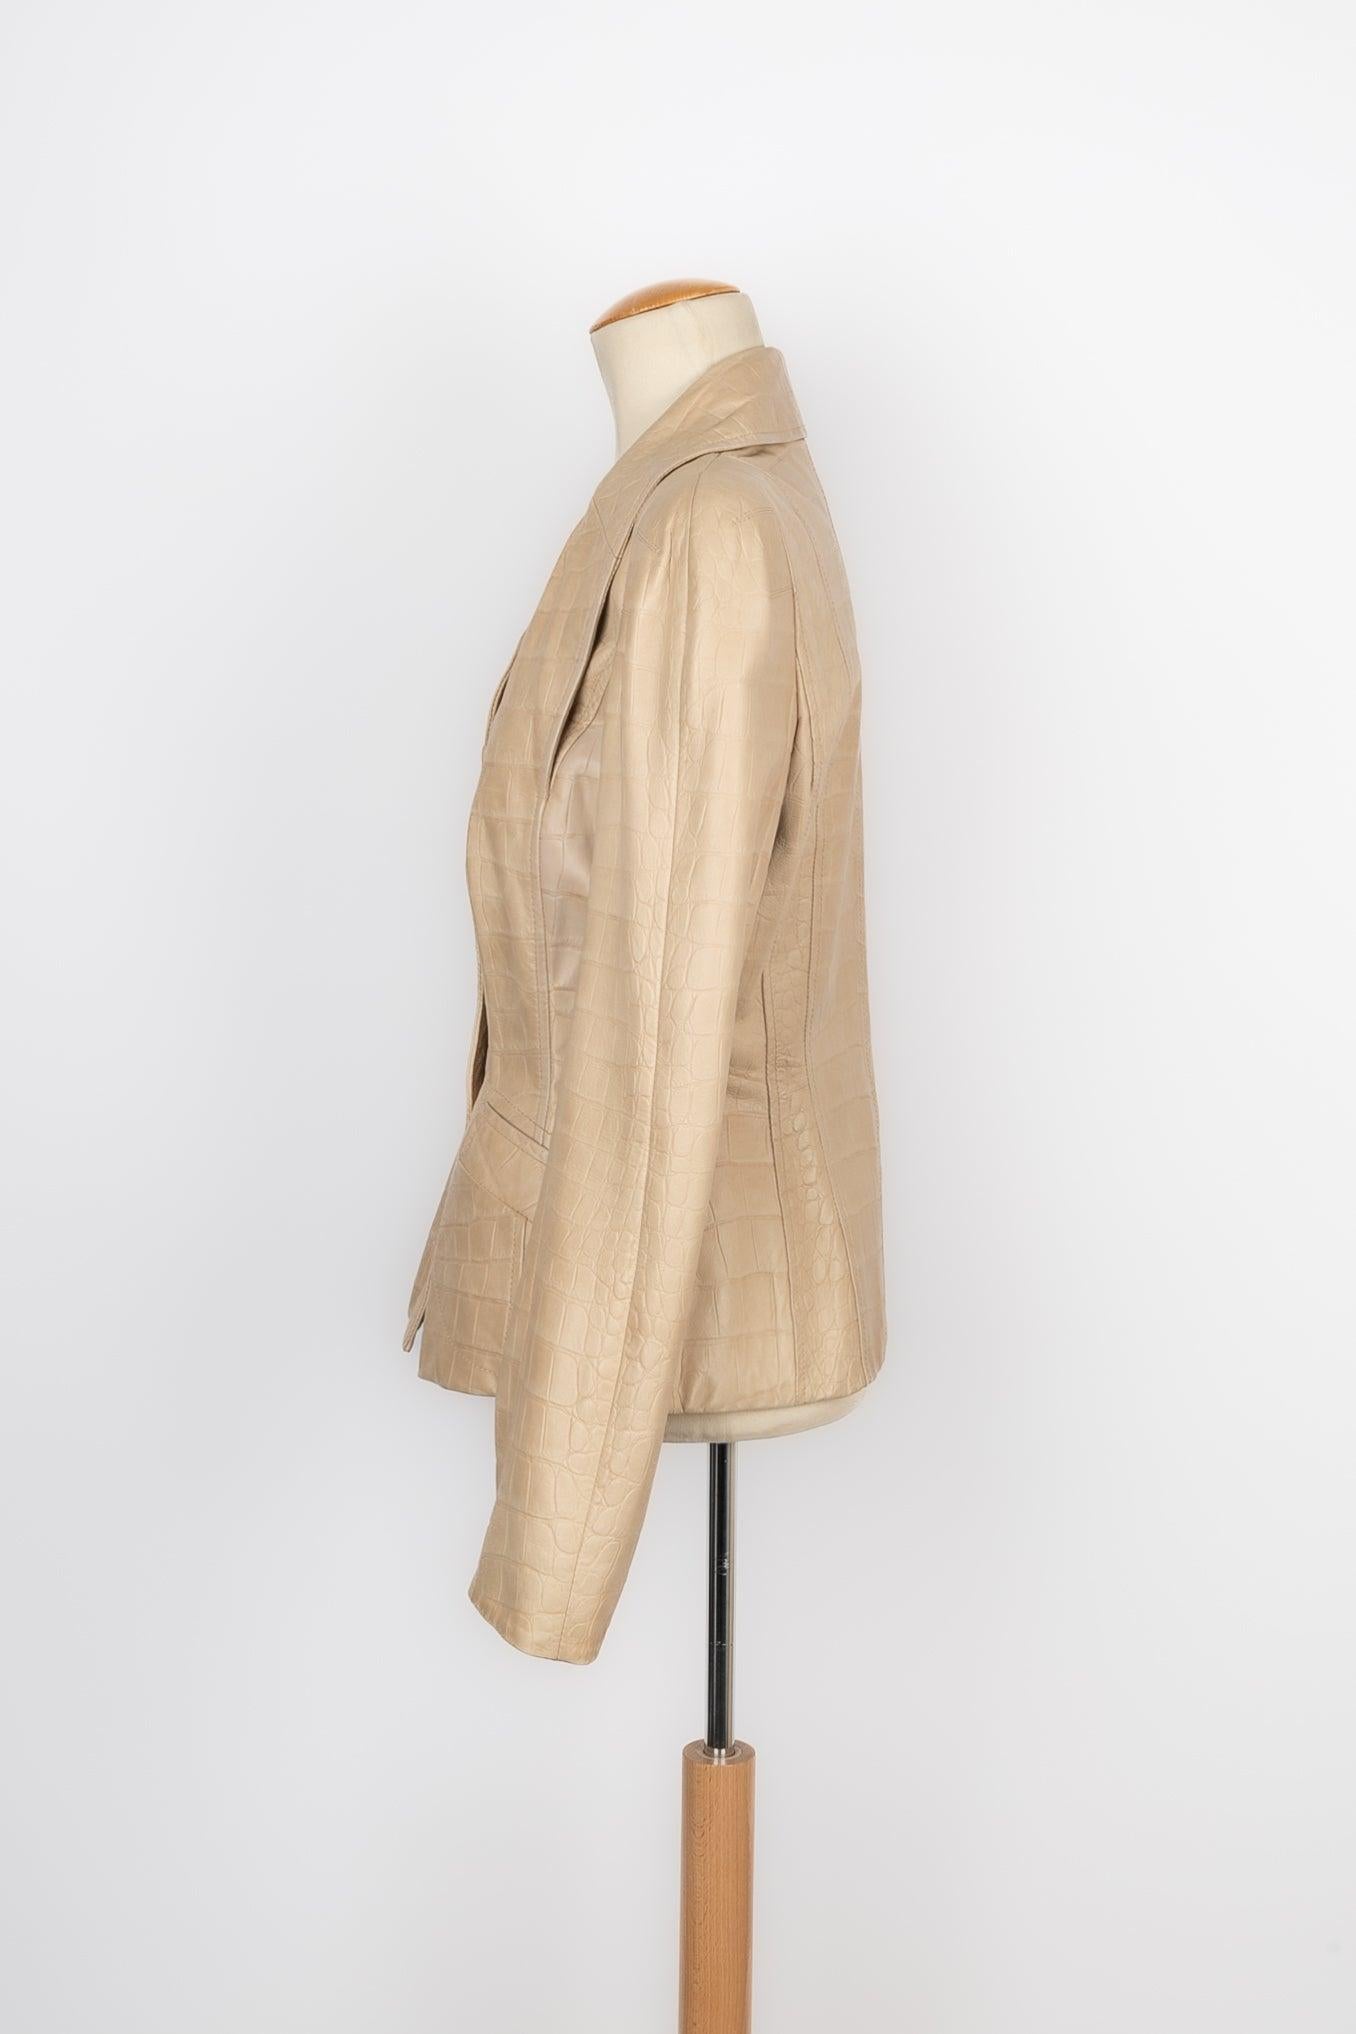 Dior - (Made in Italy) Lamb leather jacket with a crocodile print in beige tones. Silk lining. Size 44FR. 2005 Fall-Winter Ready-to-Wear Collection.

Additional information: 
Condition: Very good condition
Dimensions: Shoulder width: 40 cm - Sleeve